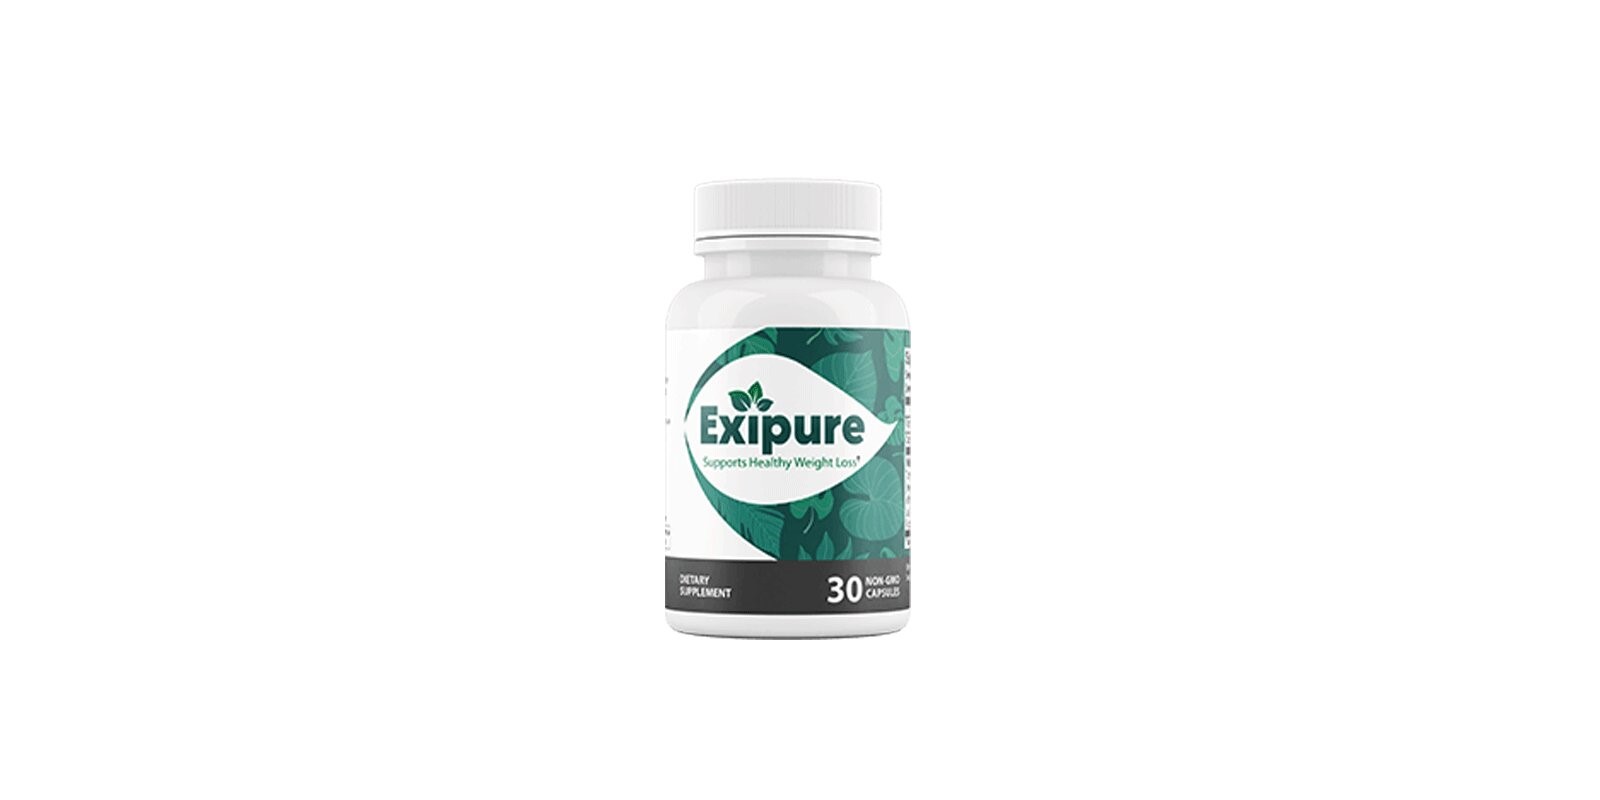 Exipure Weight Loss Supplement Reviews - Exipure Supplements Review -  YouTube